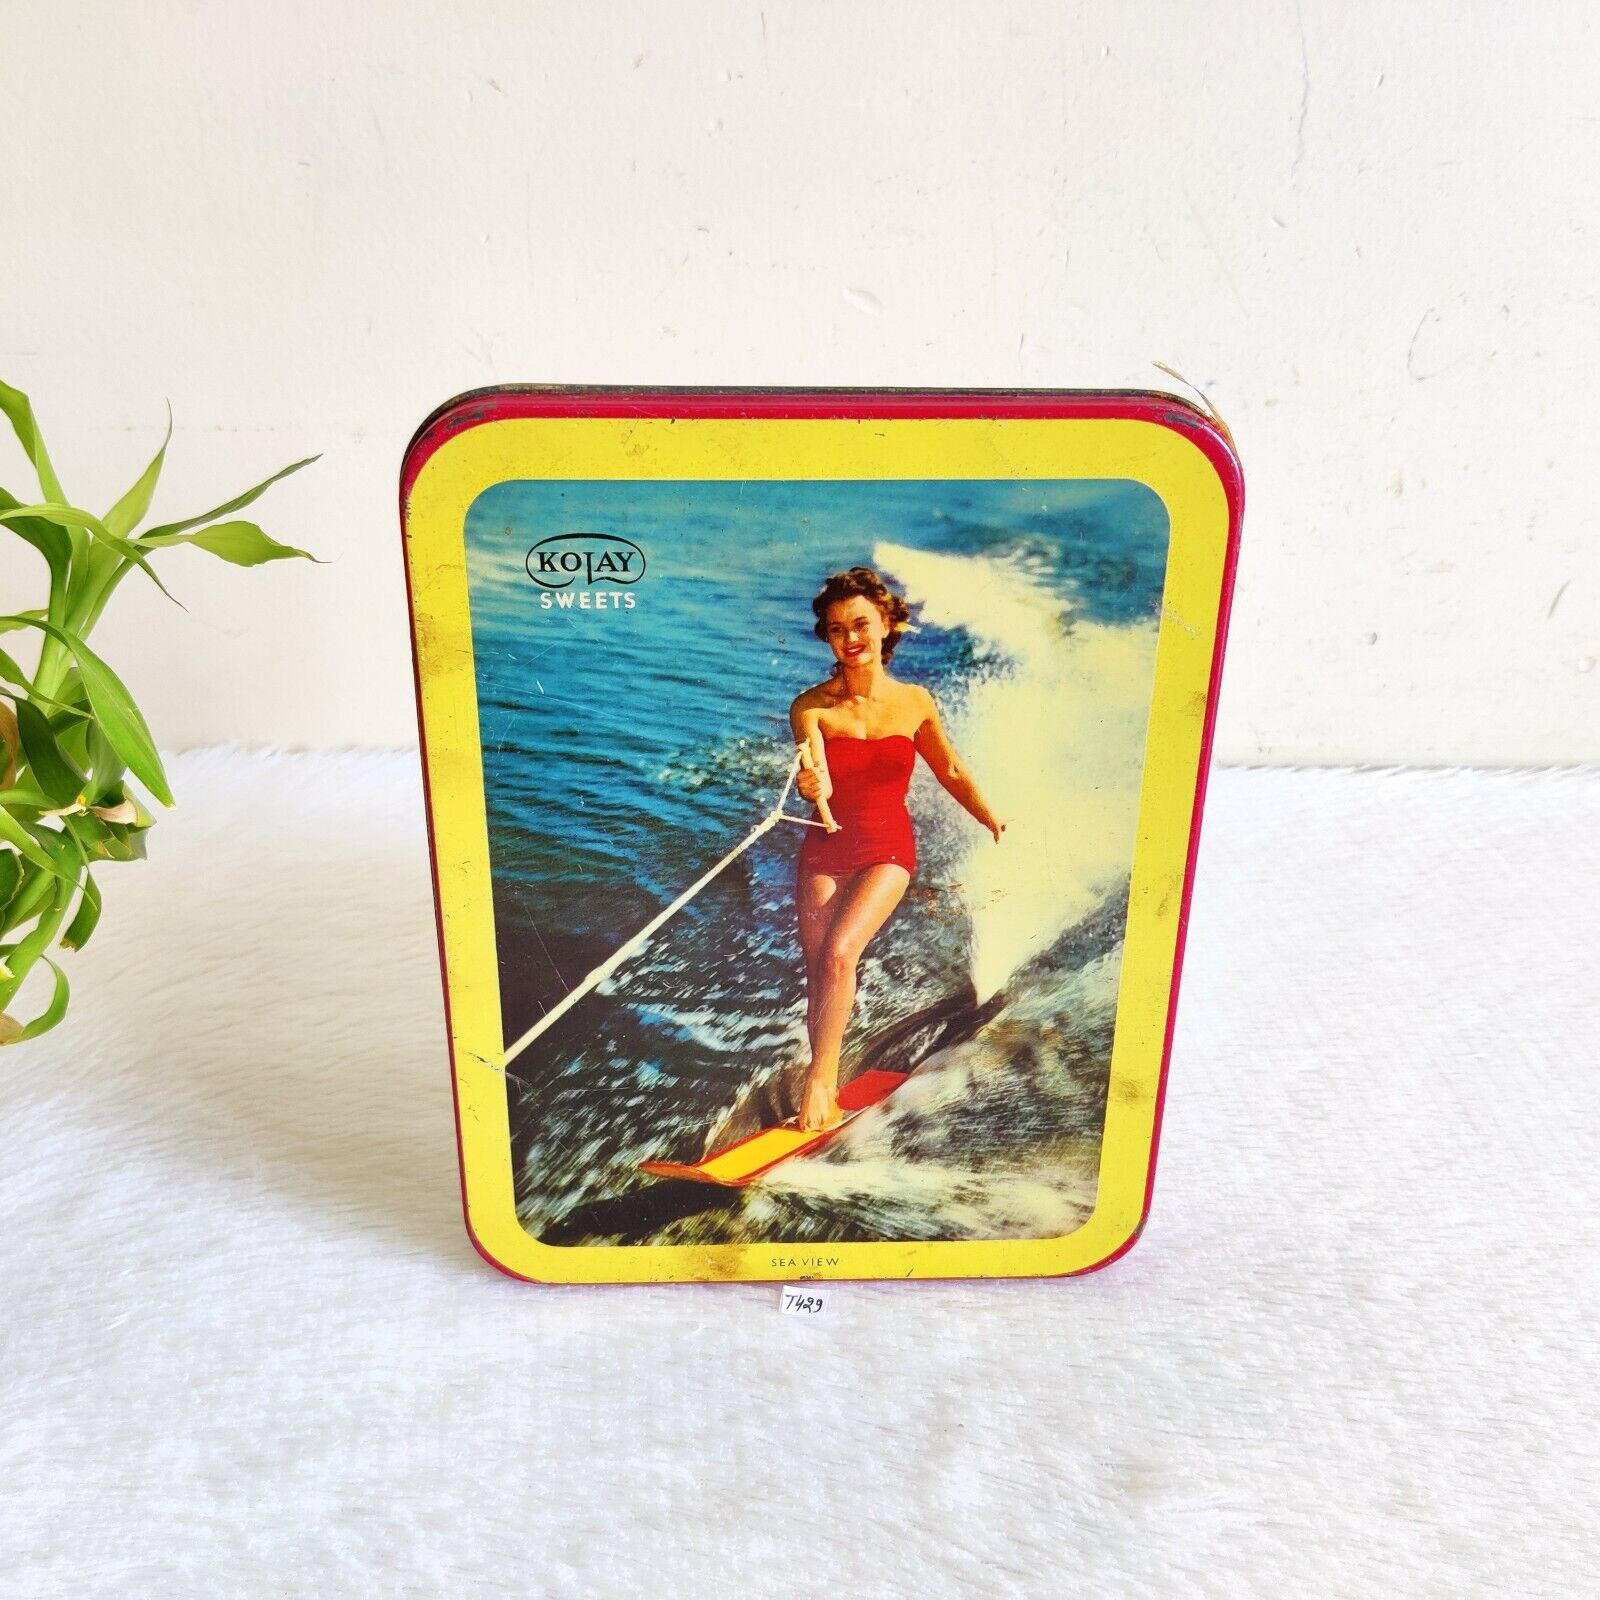 Vintage Skirts Ahoy Esther Williams Graphics Kolay Sweets Advertising Tin T429